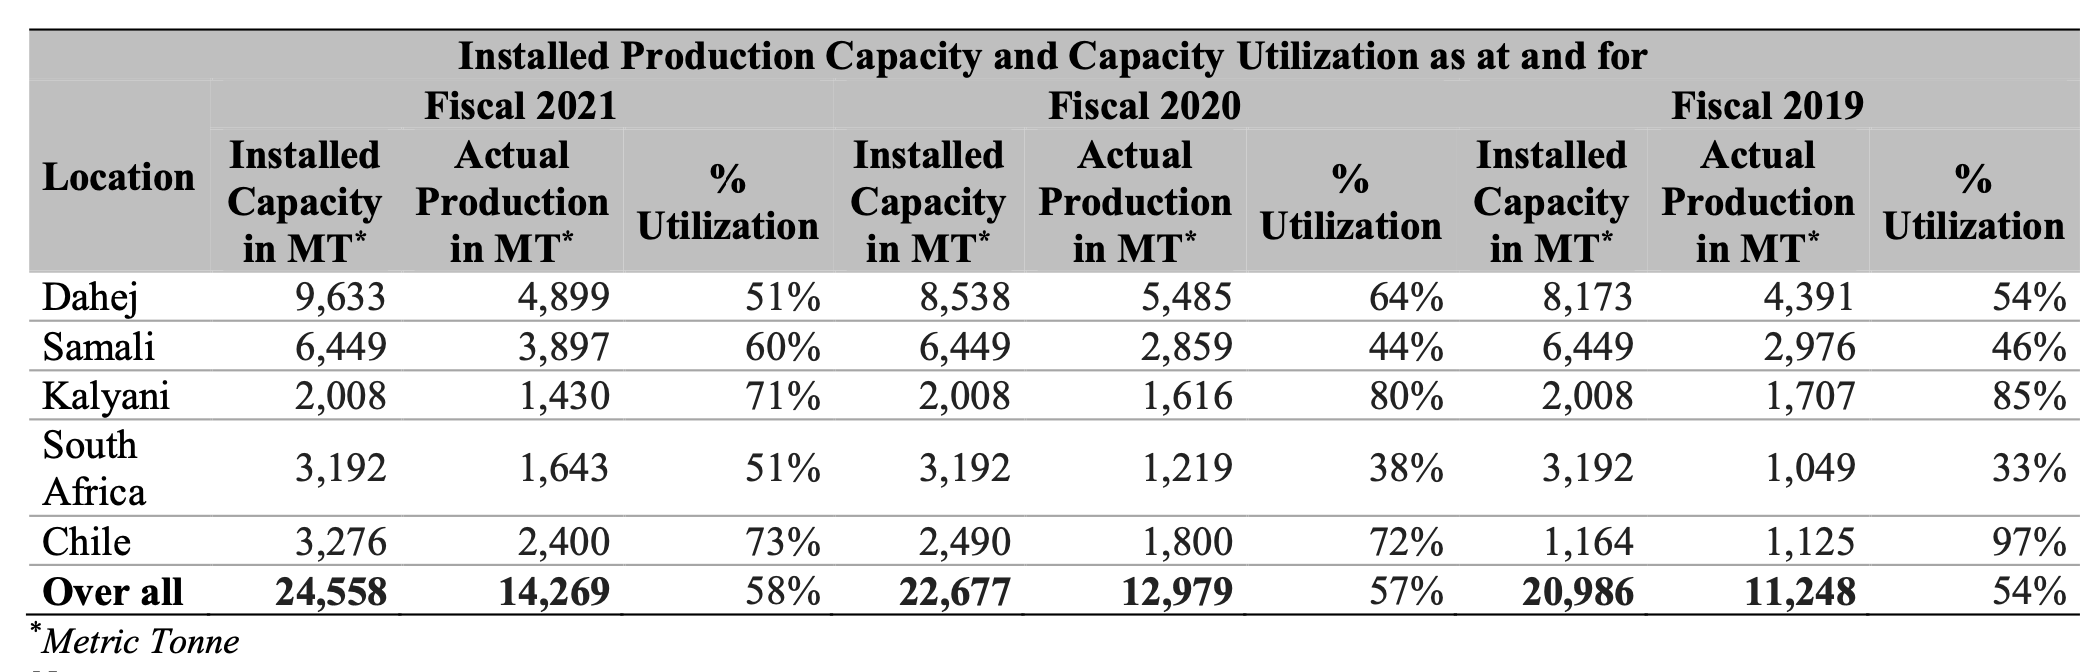 installed-production-capacity-and-capacity-utilization